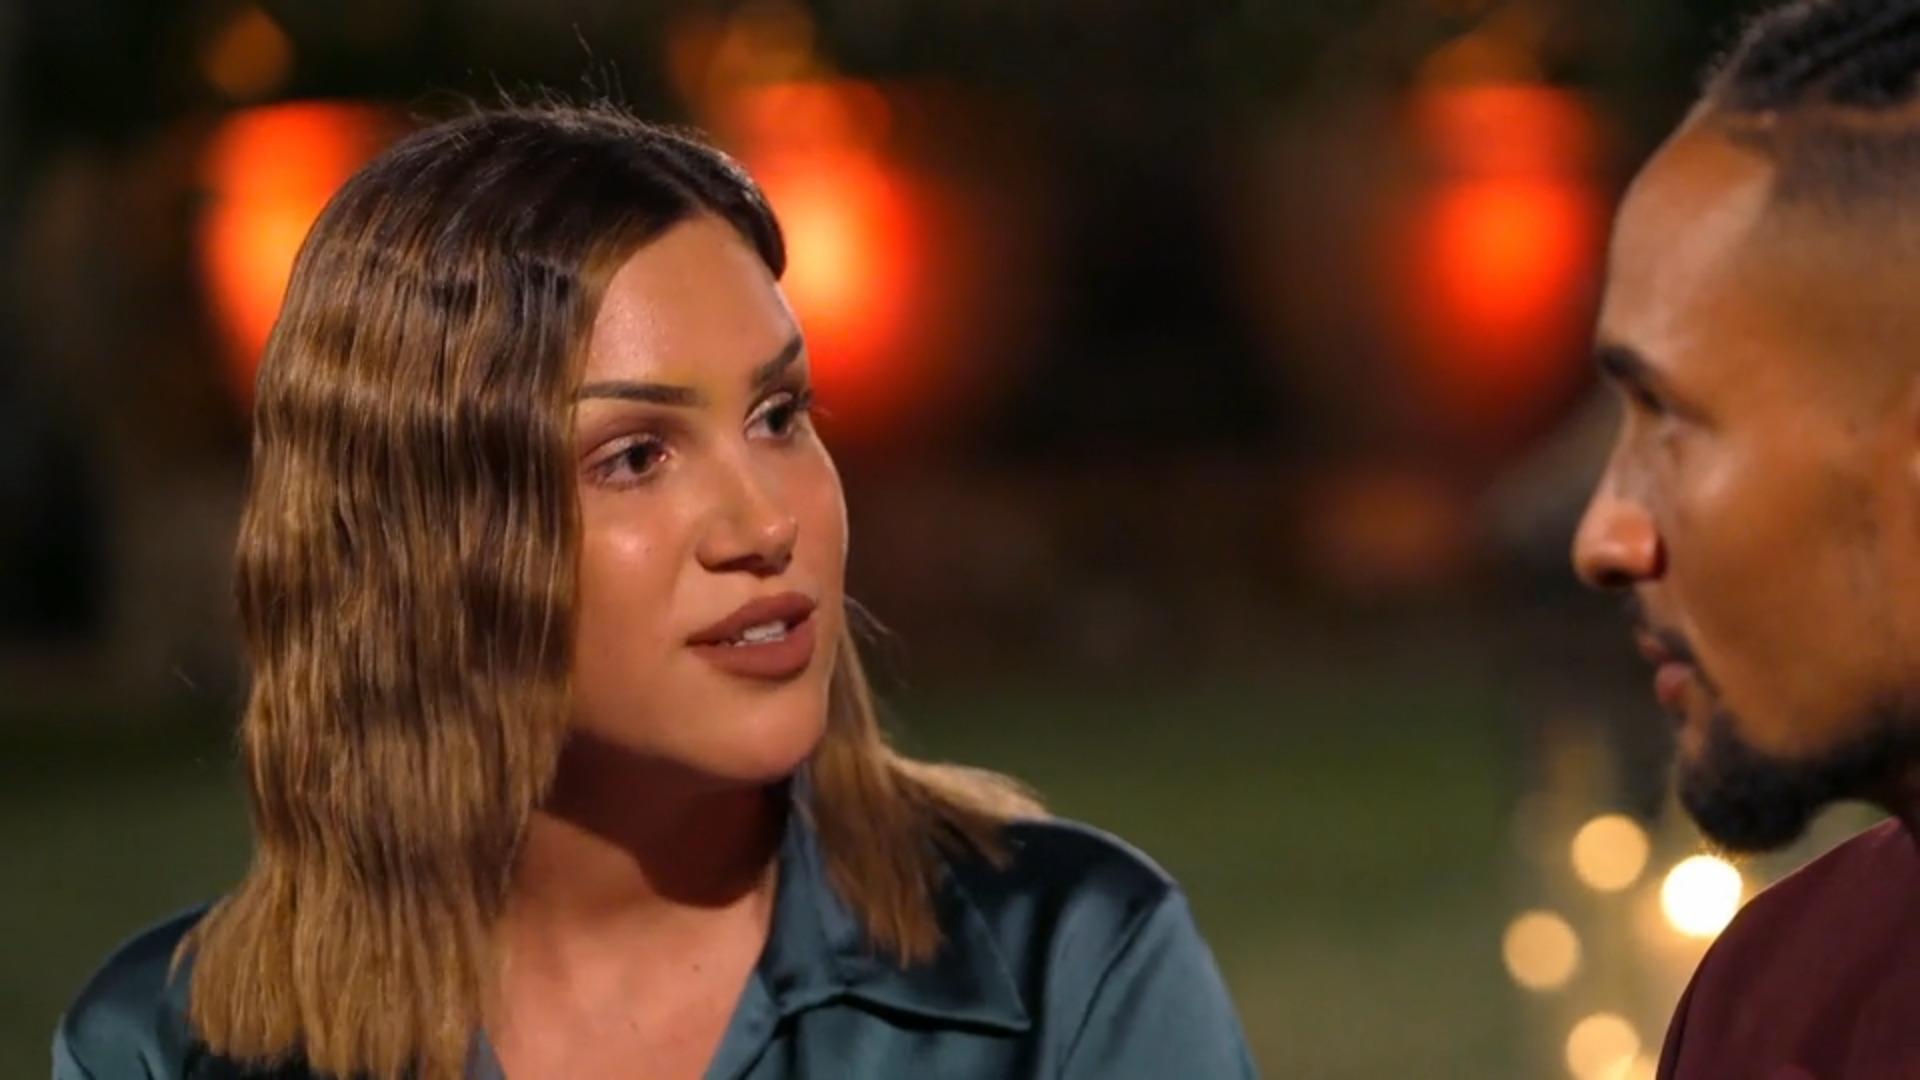 Rebecca surprises David with a clear warning Harsh words for the Bachelor